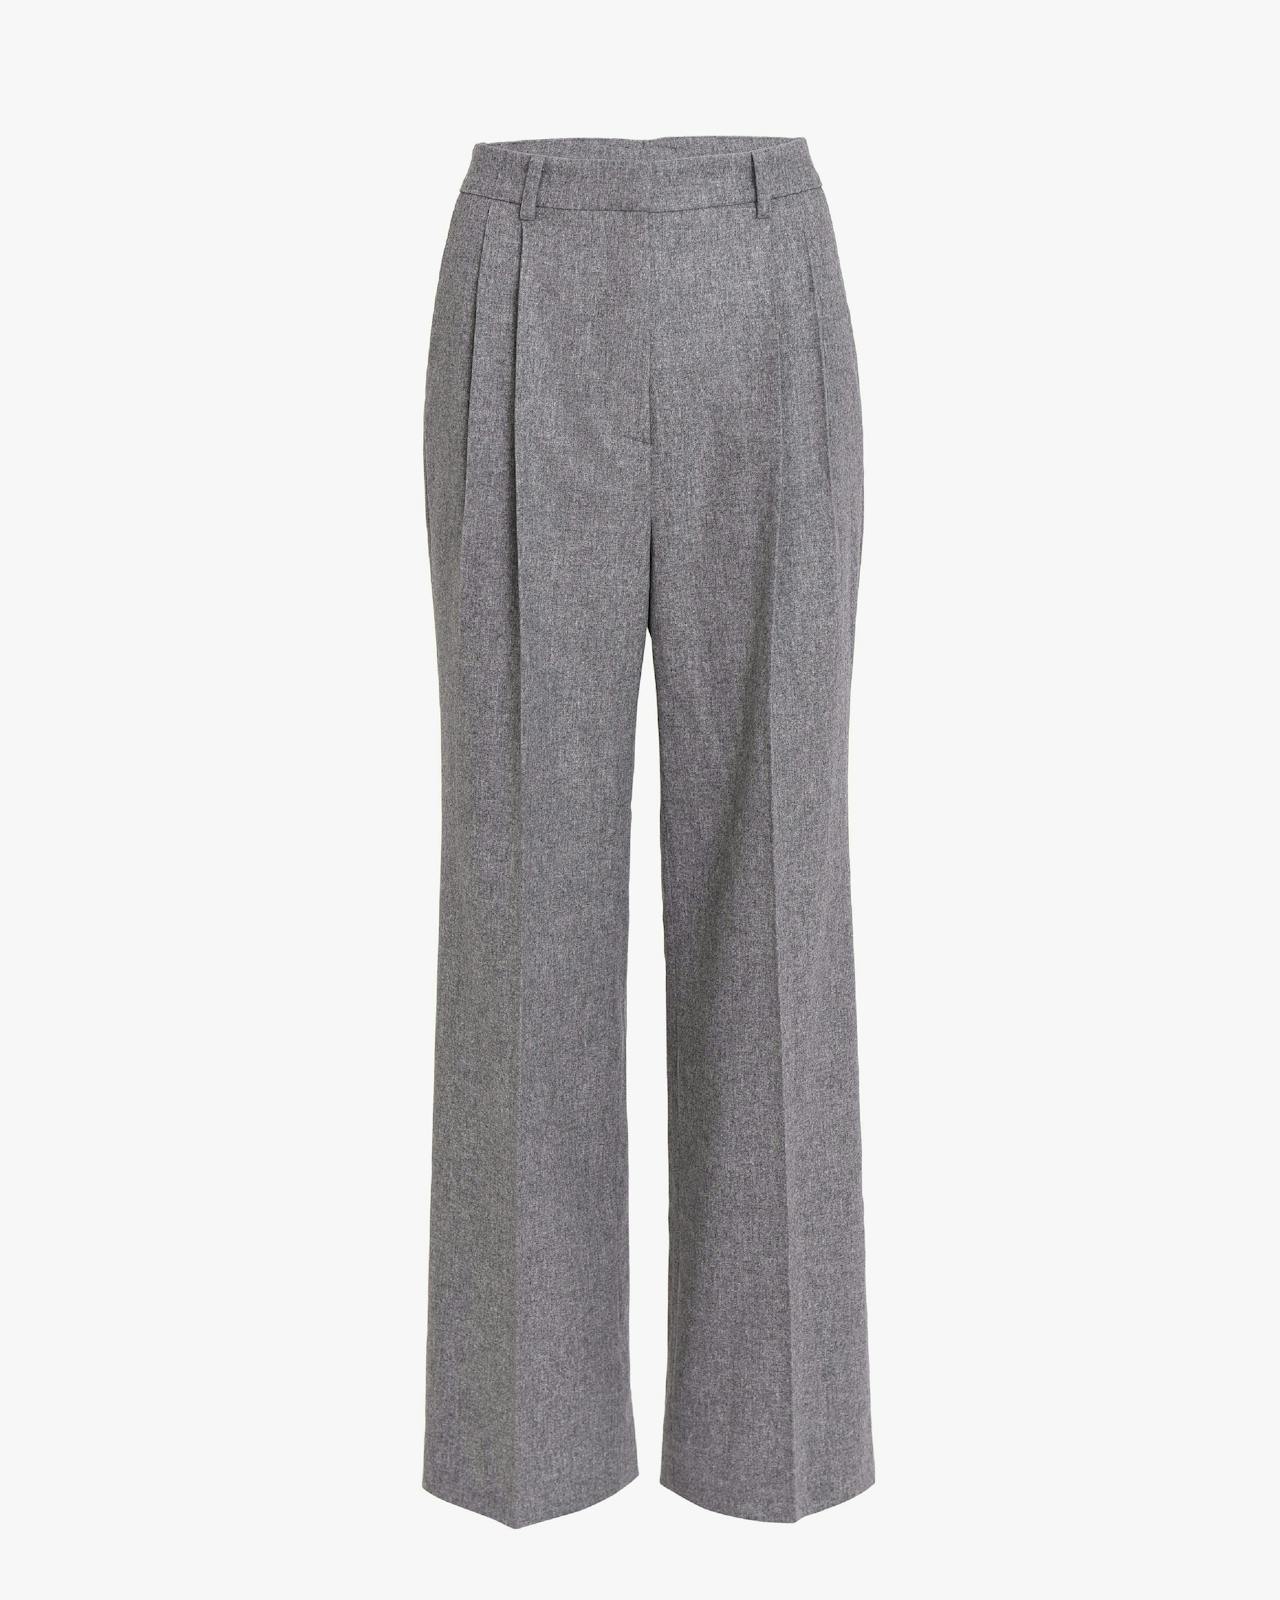 Stanley grey wool cashmere trouser